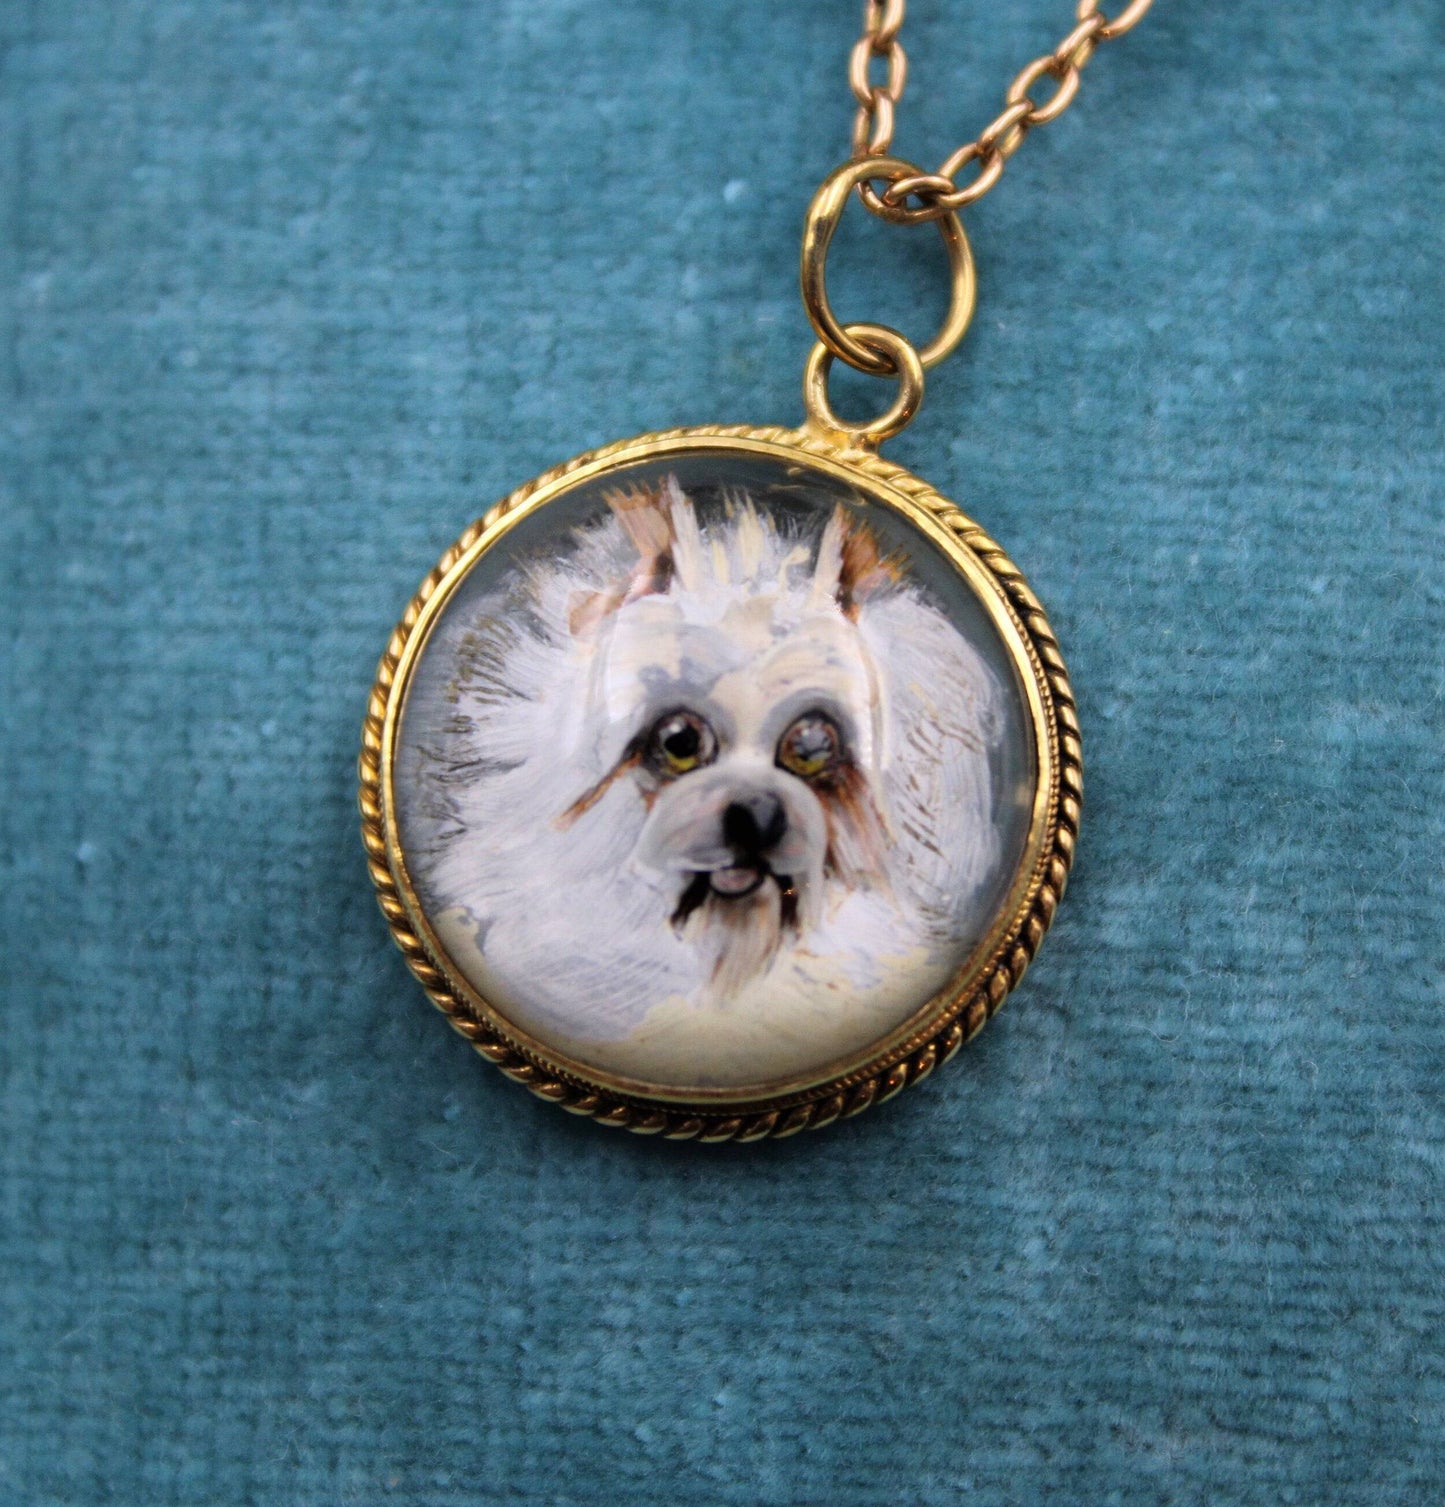 A very fine "Essex Crystal" Pendant depicting a Dog set in 15ct Yellow Gold, English, Circa 1890 - Robin Haydock Antiques